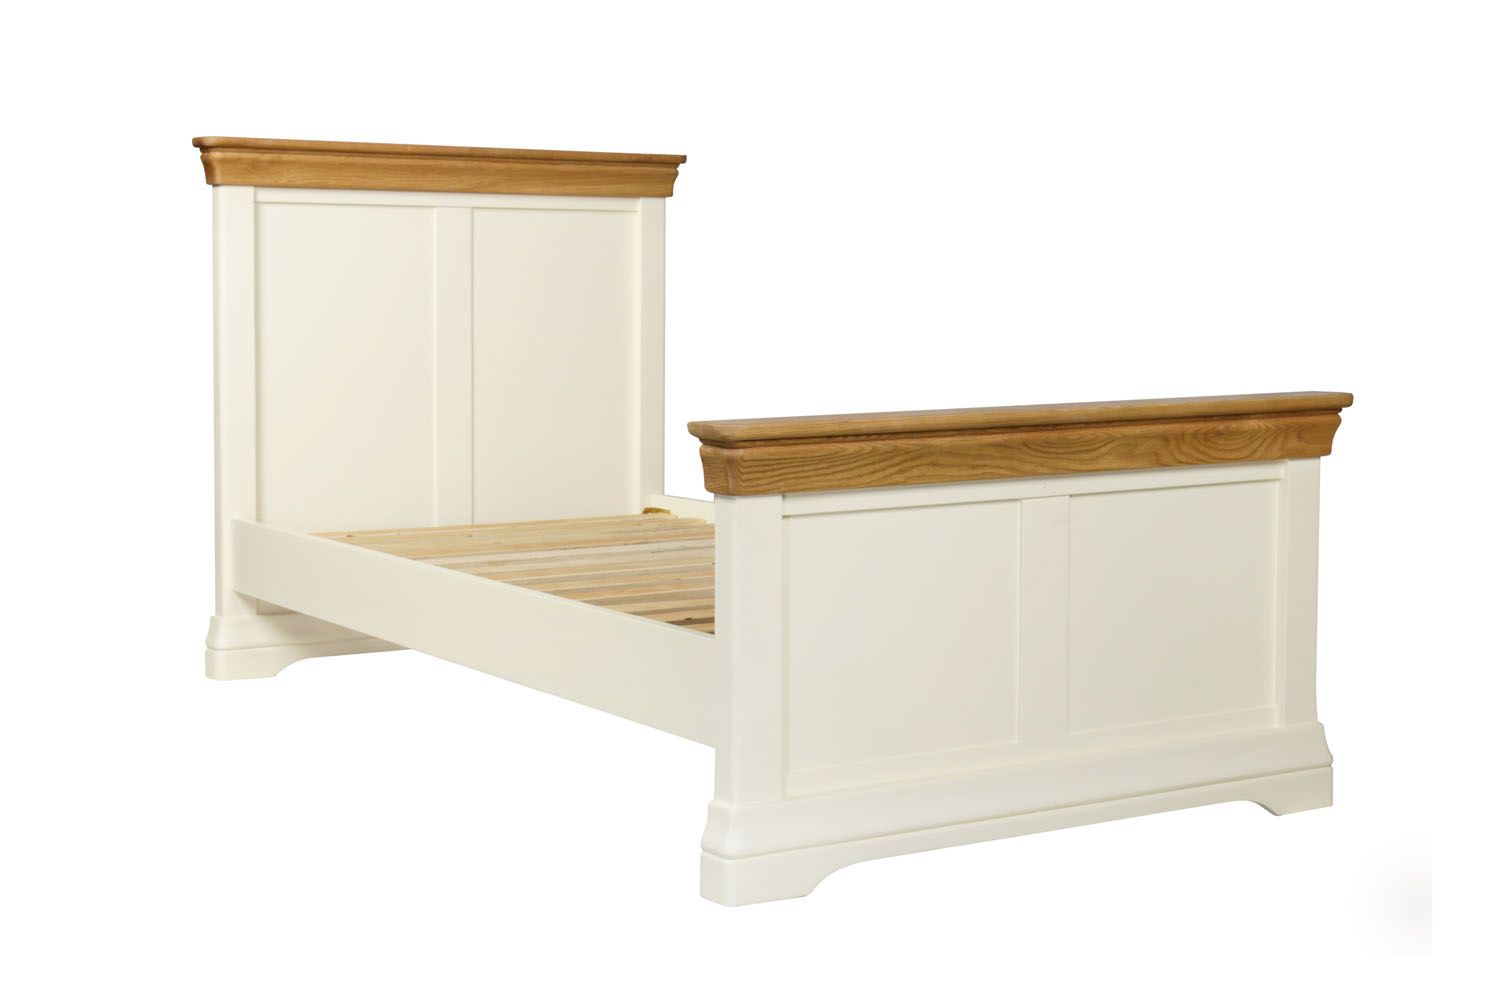 Farmhouse Country Oak Cream Painted 3 Foot Single Bed - 10% OFF WINTER SALE